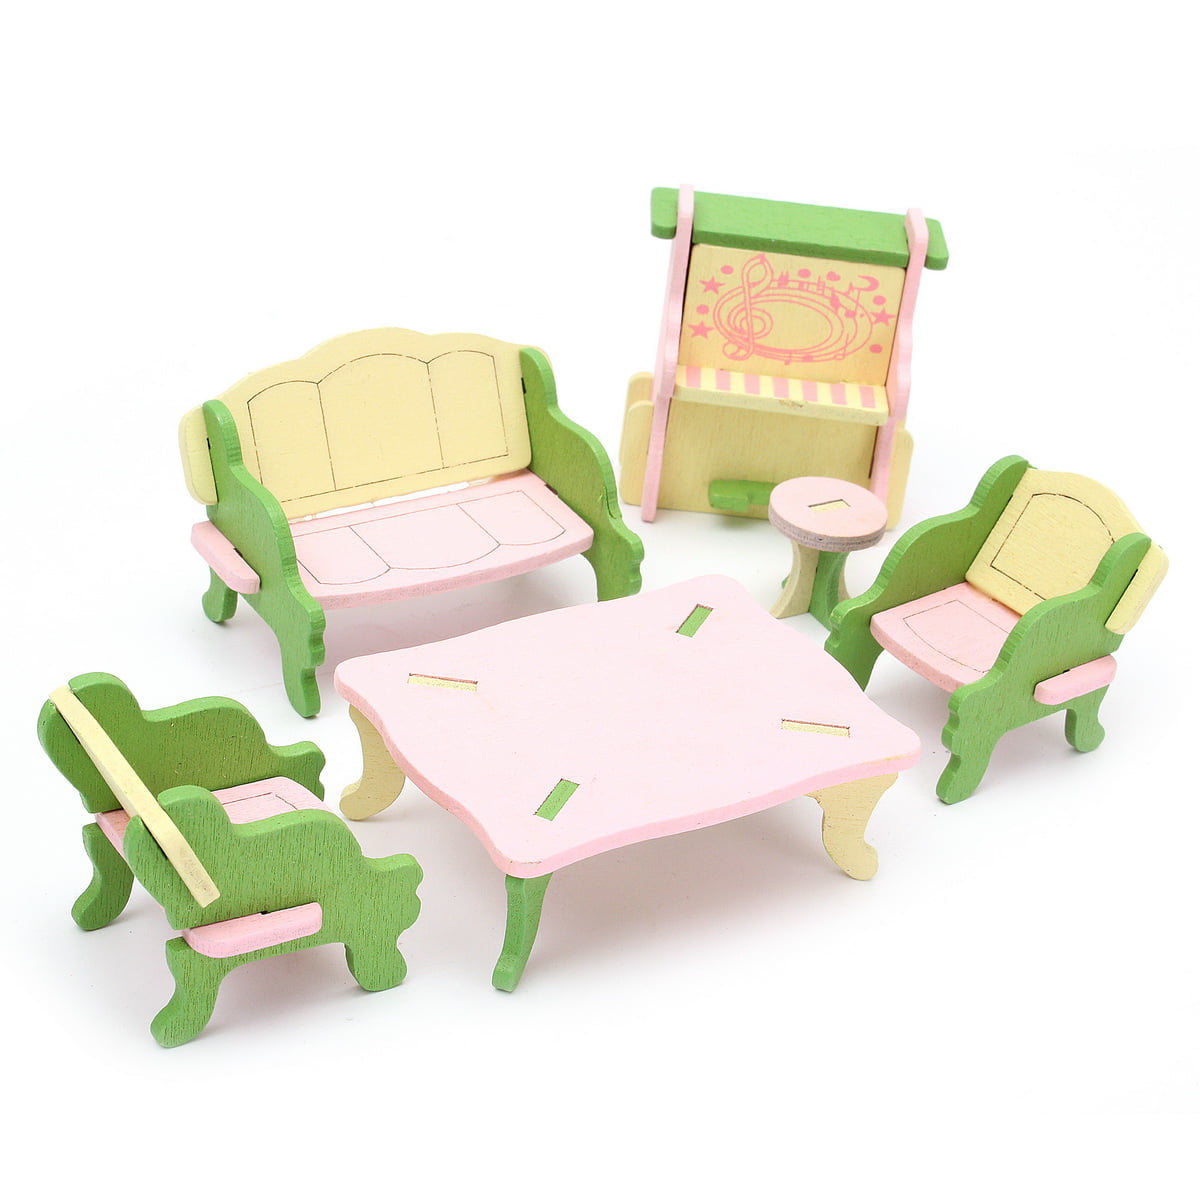 Kids Children Wooden Furniture Dolls Family House Miniature Room Set Toys Gifts 